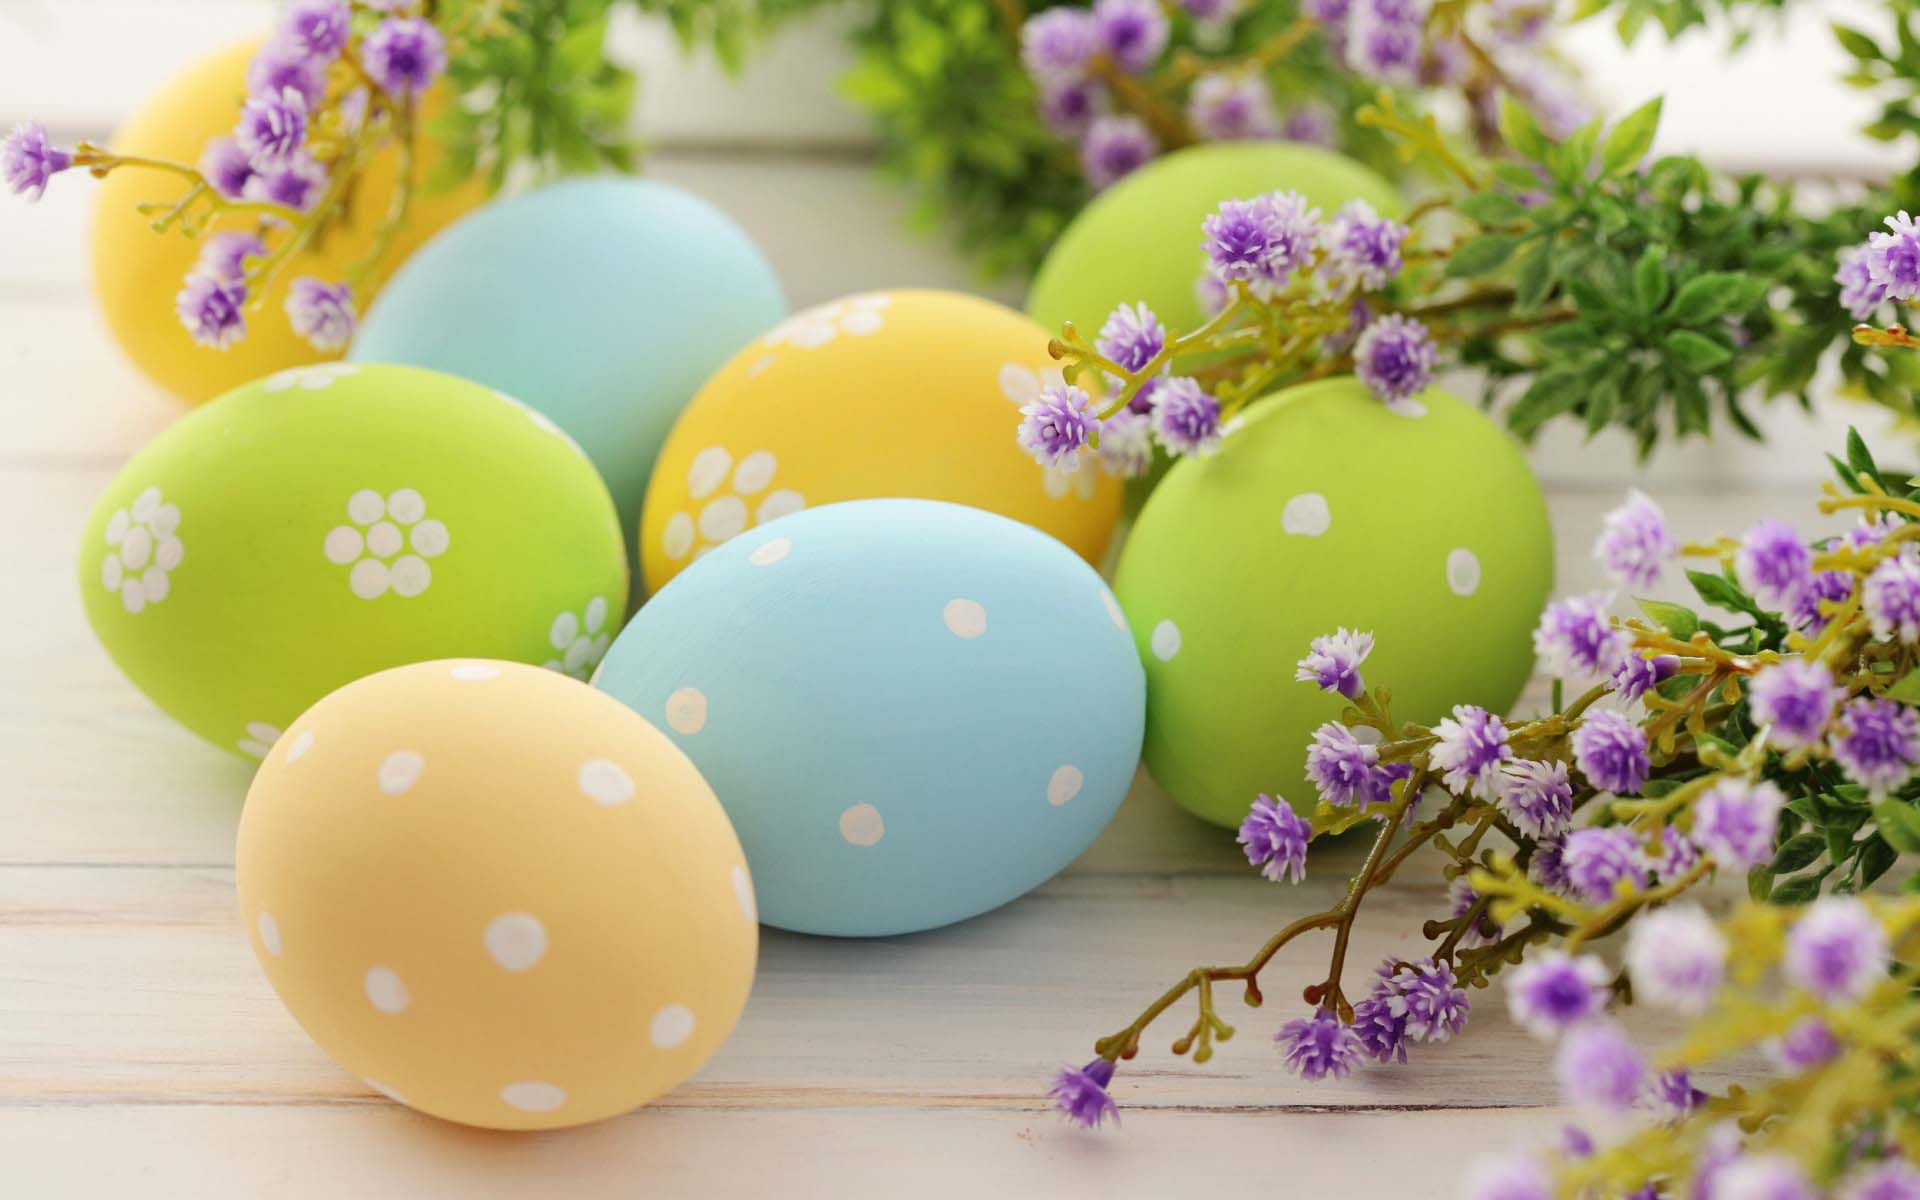 Holidays Happy Easter 2014 HD Wallpaper 1900×1200. Cool PC